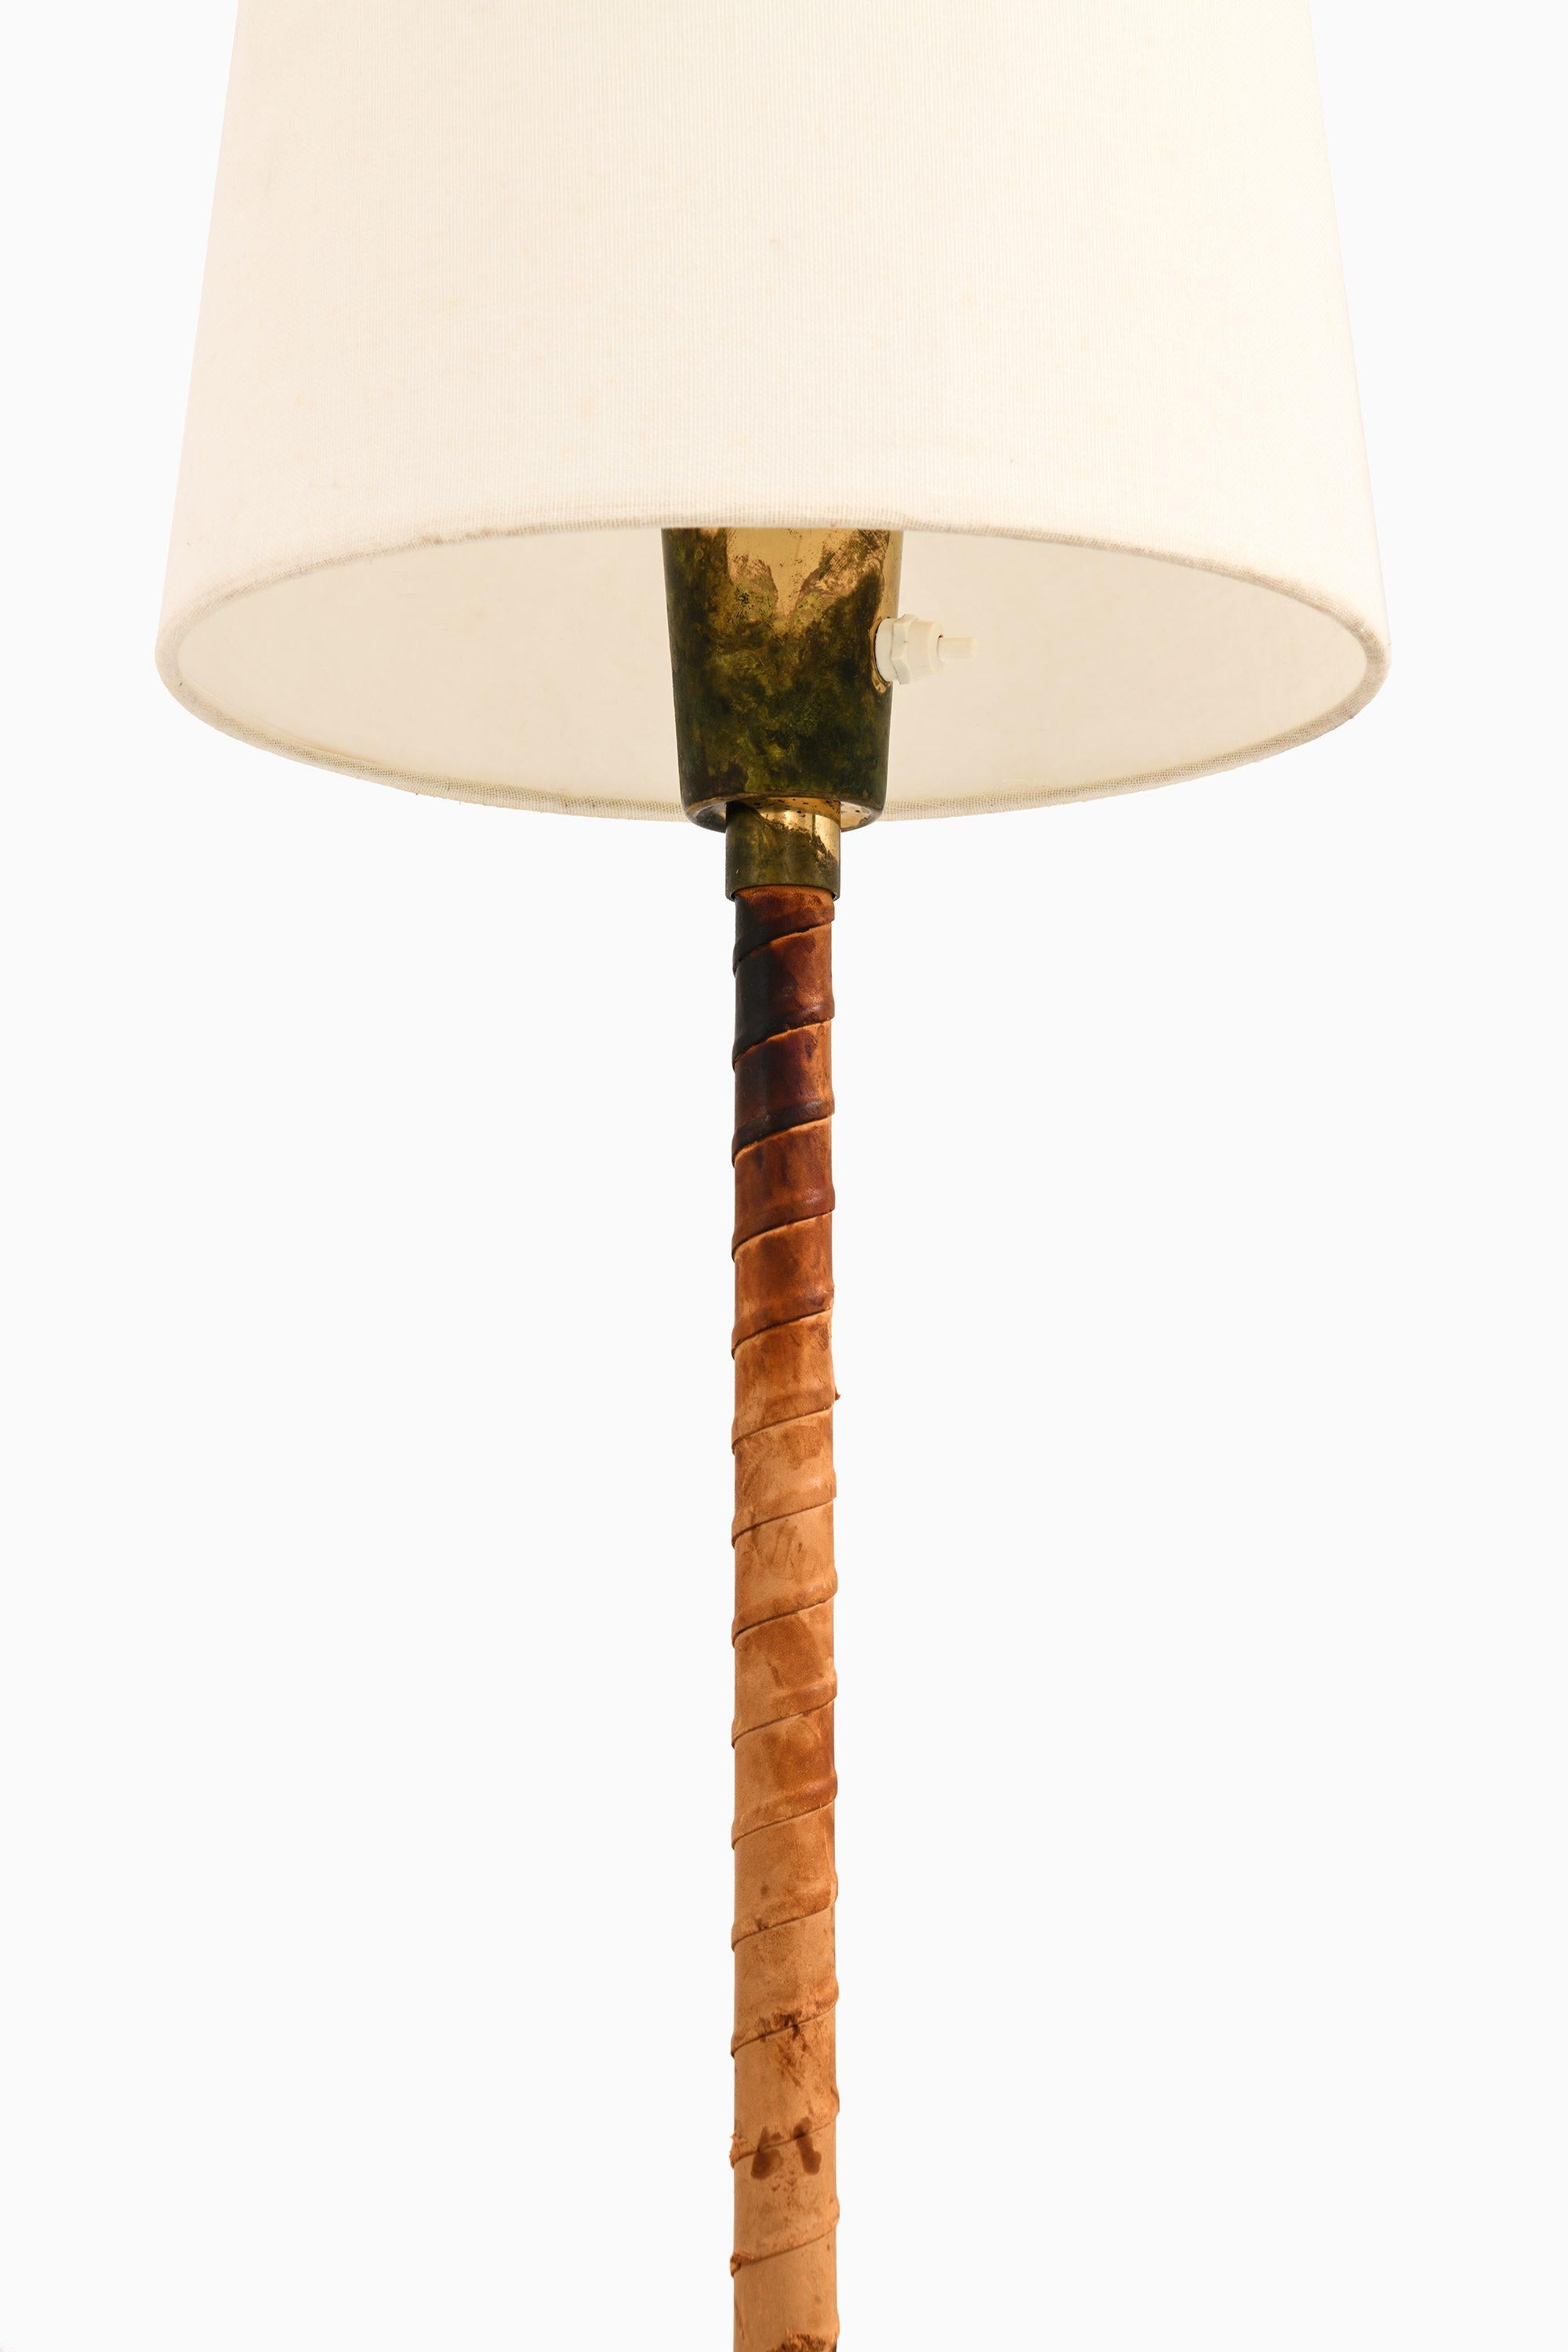 Scandinavian Modern Floor Lamps in Leather, Brass and Lamp Shades by Lisa Johansson-Pape, 1950's For Sale